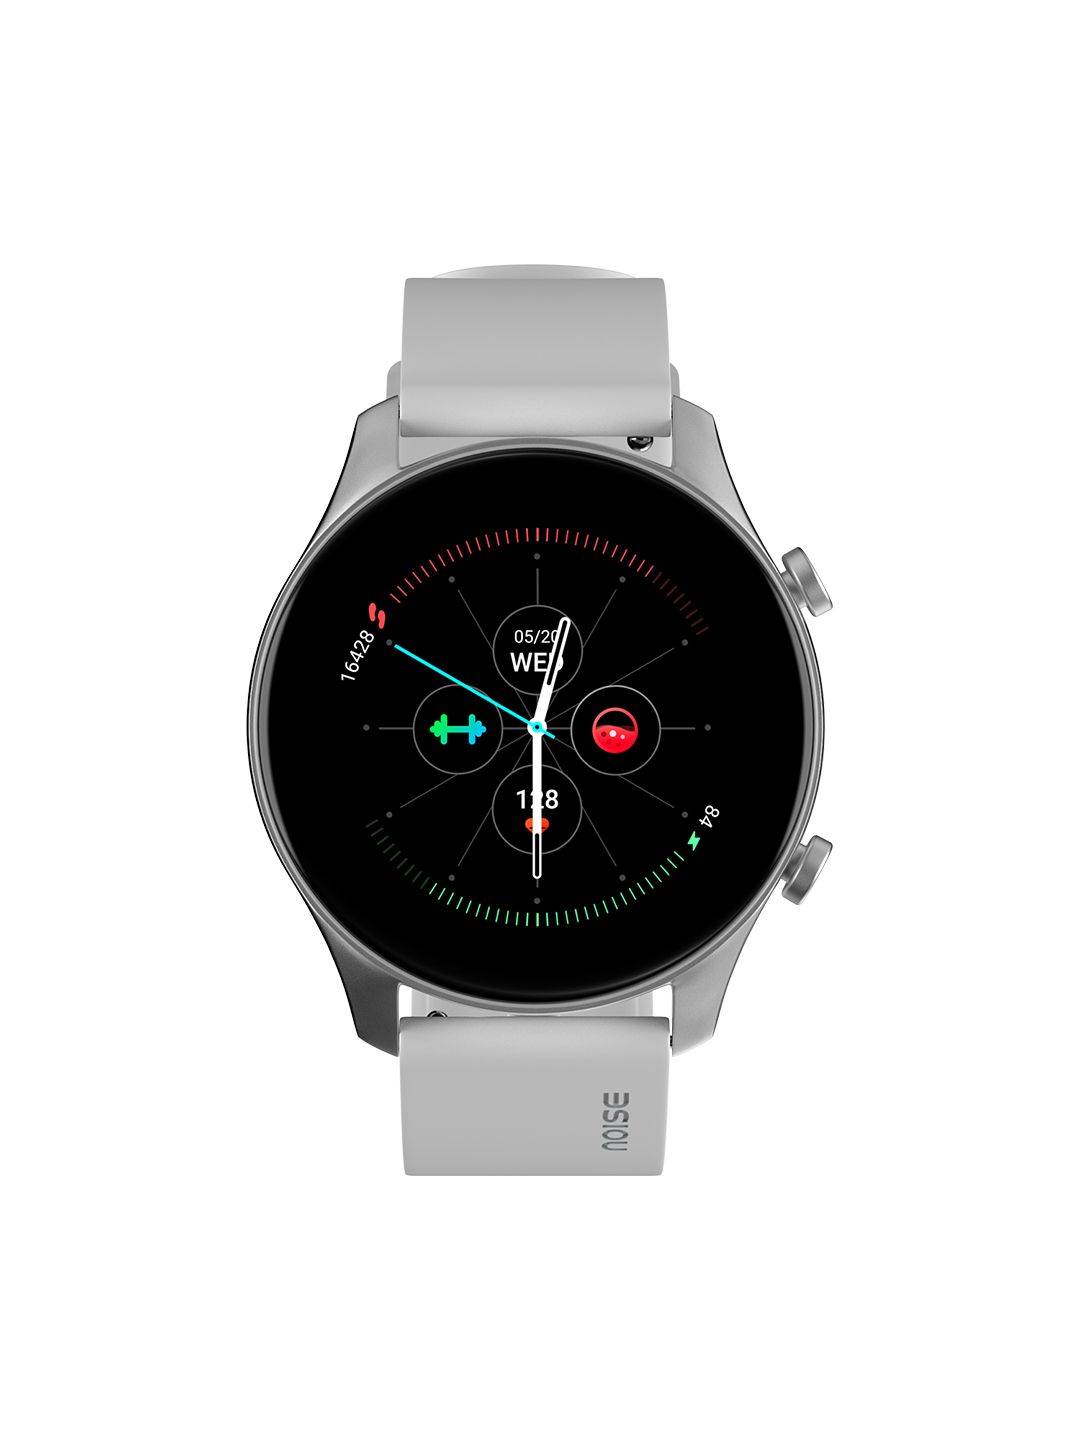 NOISE Fit Evolve 2 Smartwatch - Grey Price in India